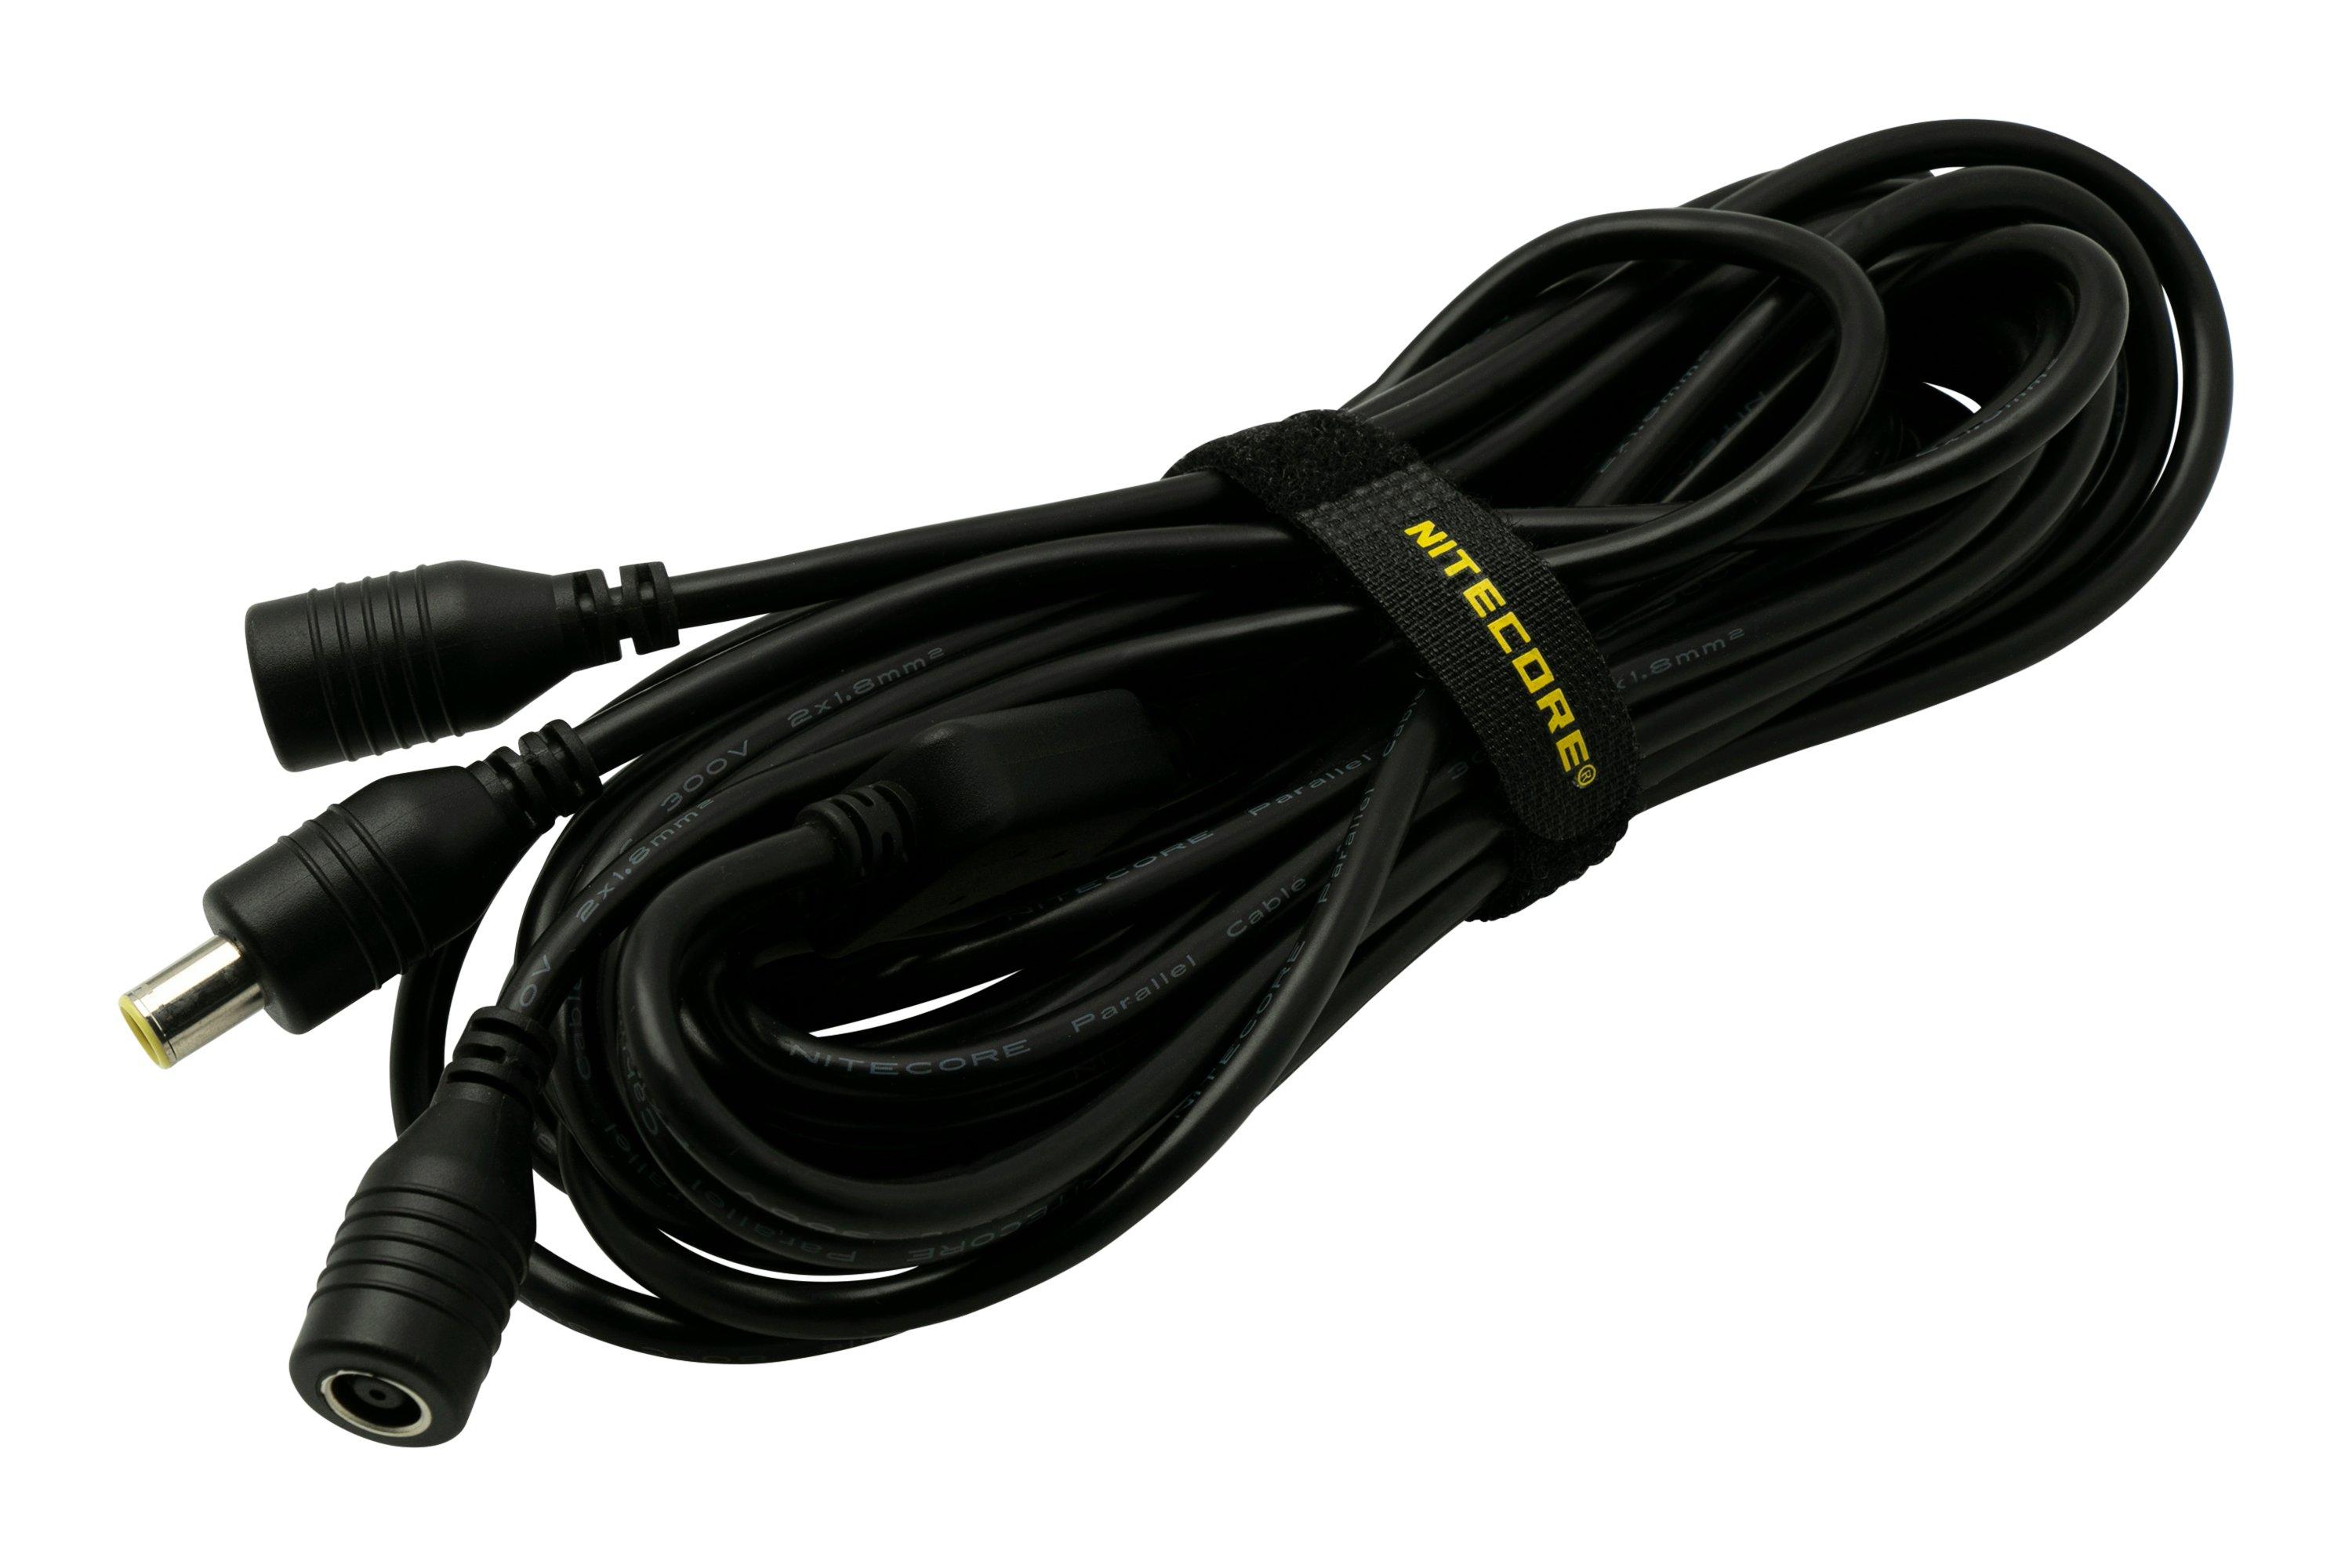 Nitecore 5m Parallel Cable for solar panels  Advantageously shopping at